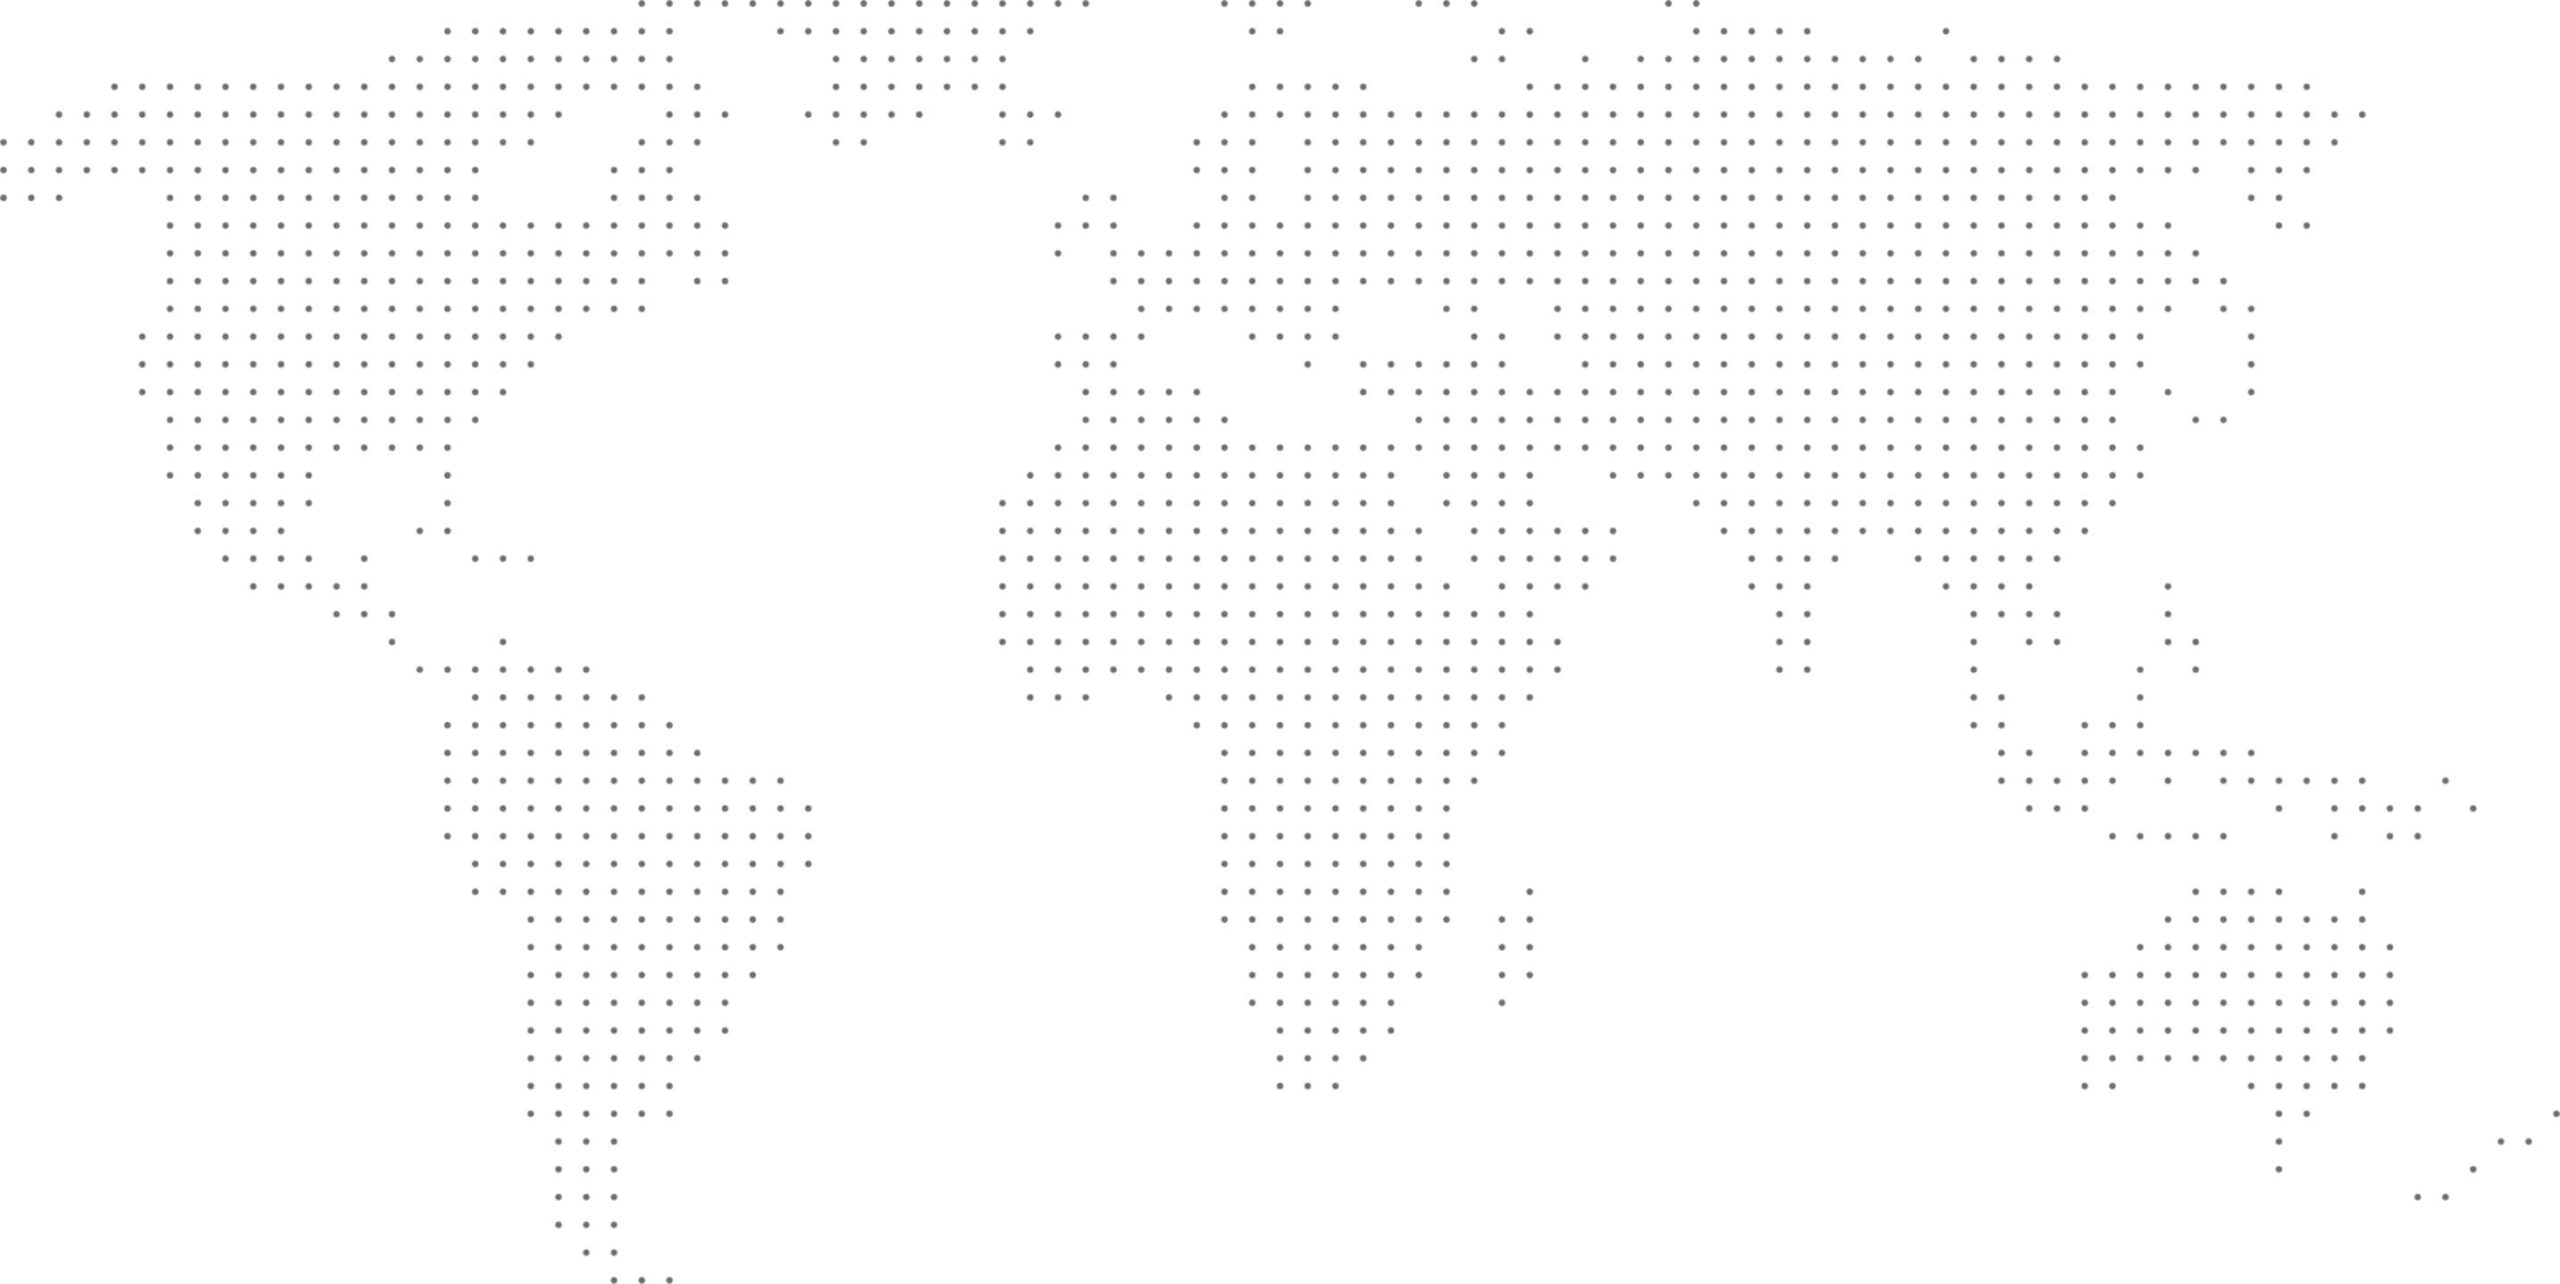 Map of the world using dots